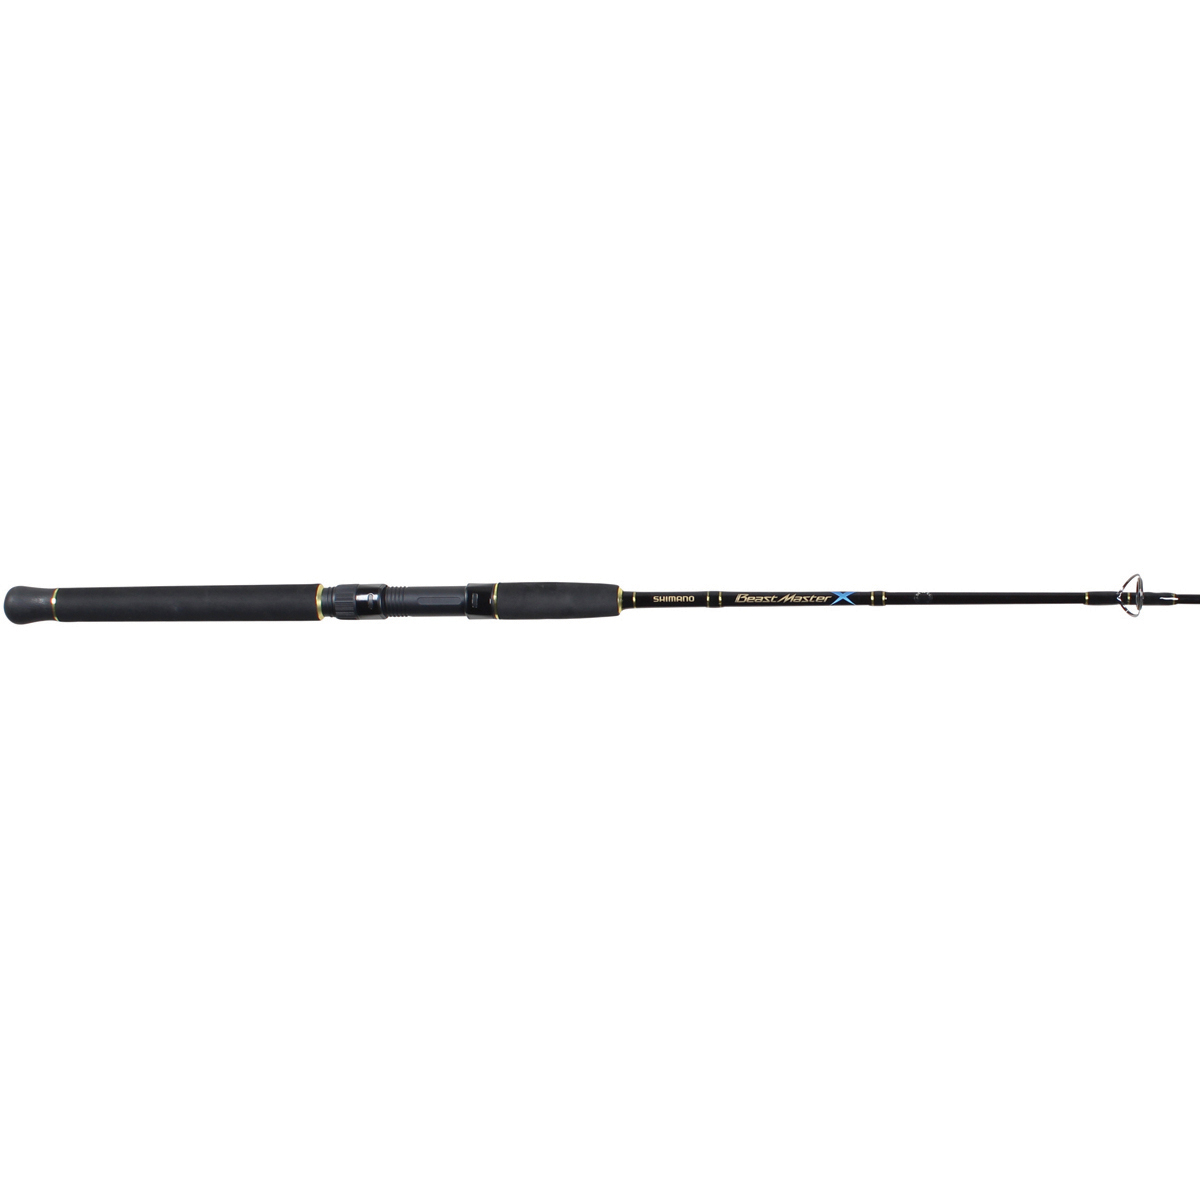 Shimano Beastmaster Spinning Rod 6ft 6in 10-15kg (1 Piece) @ Club BCF